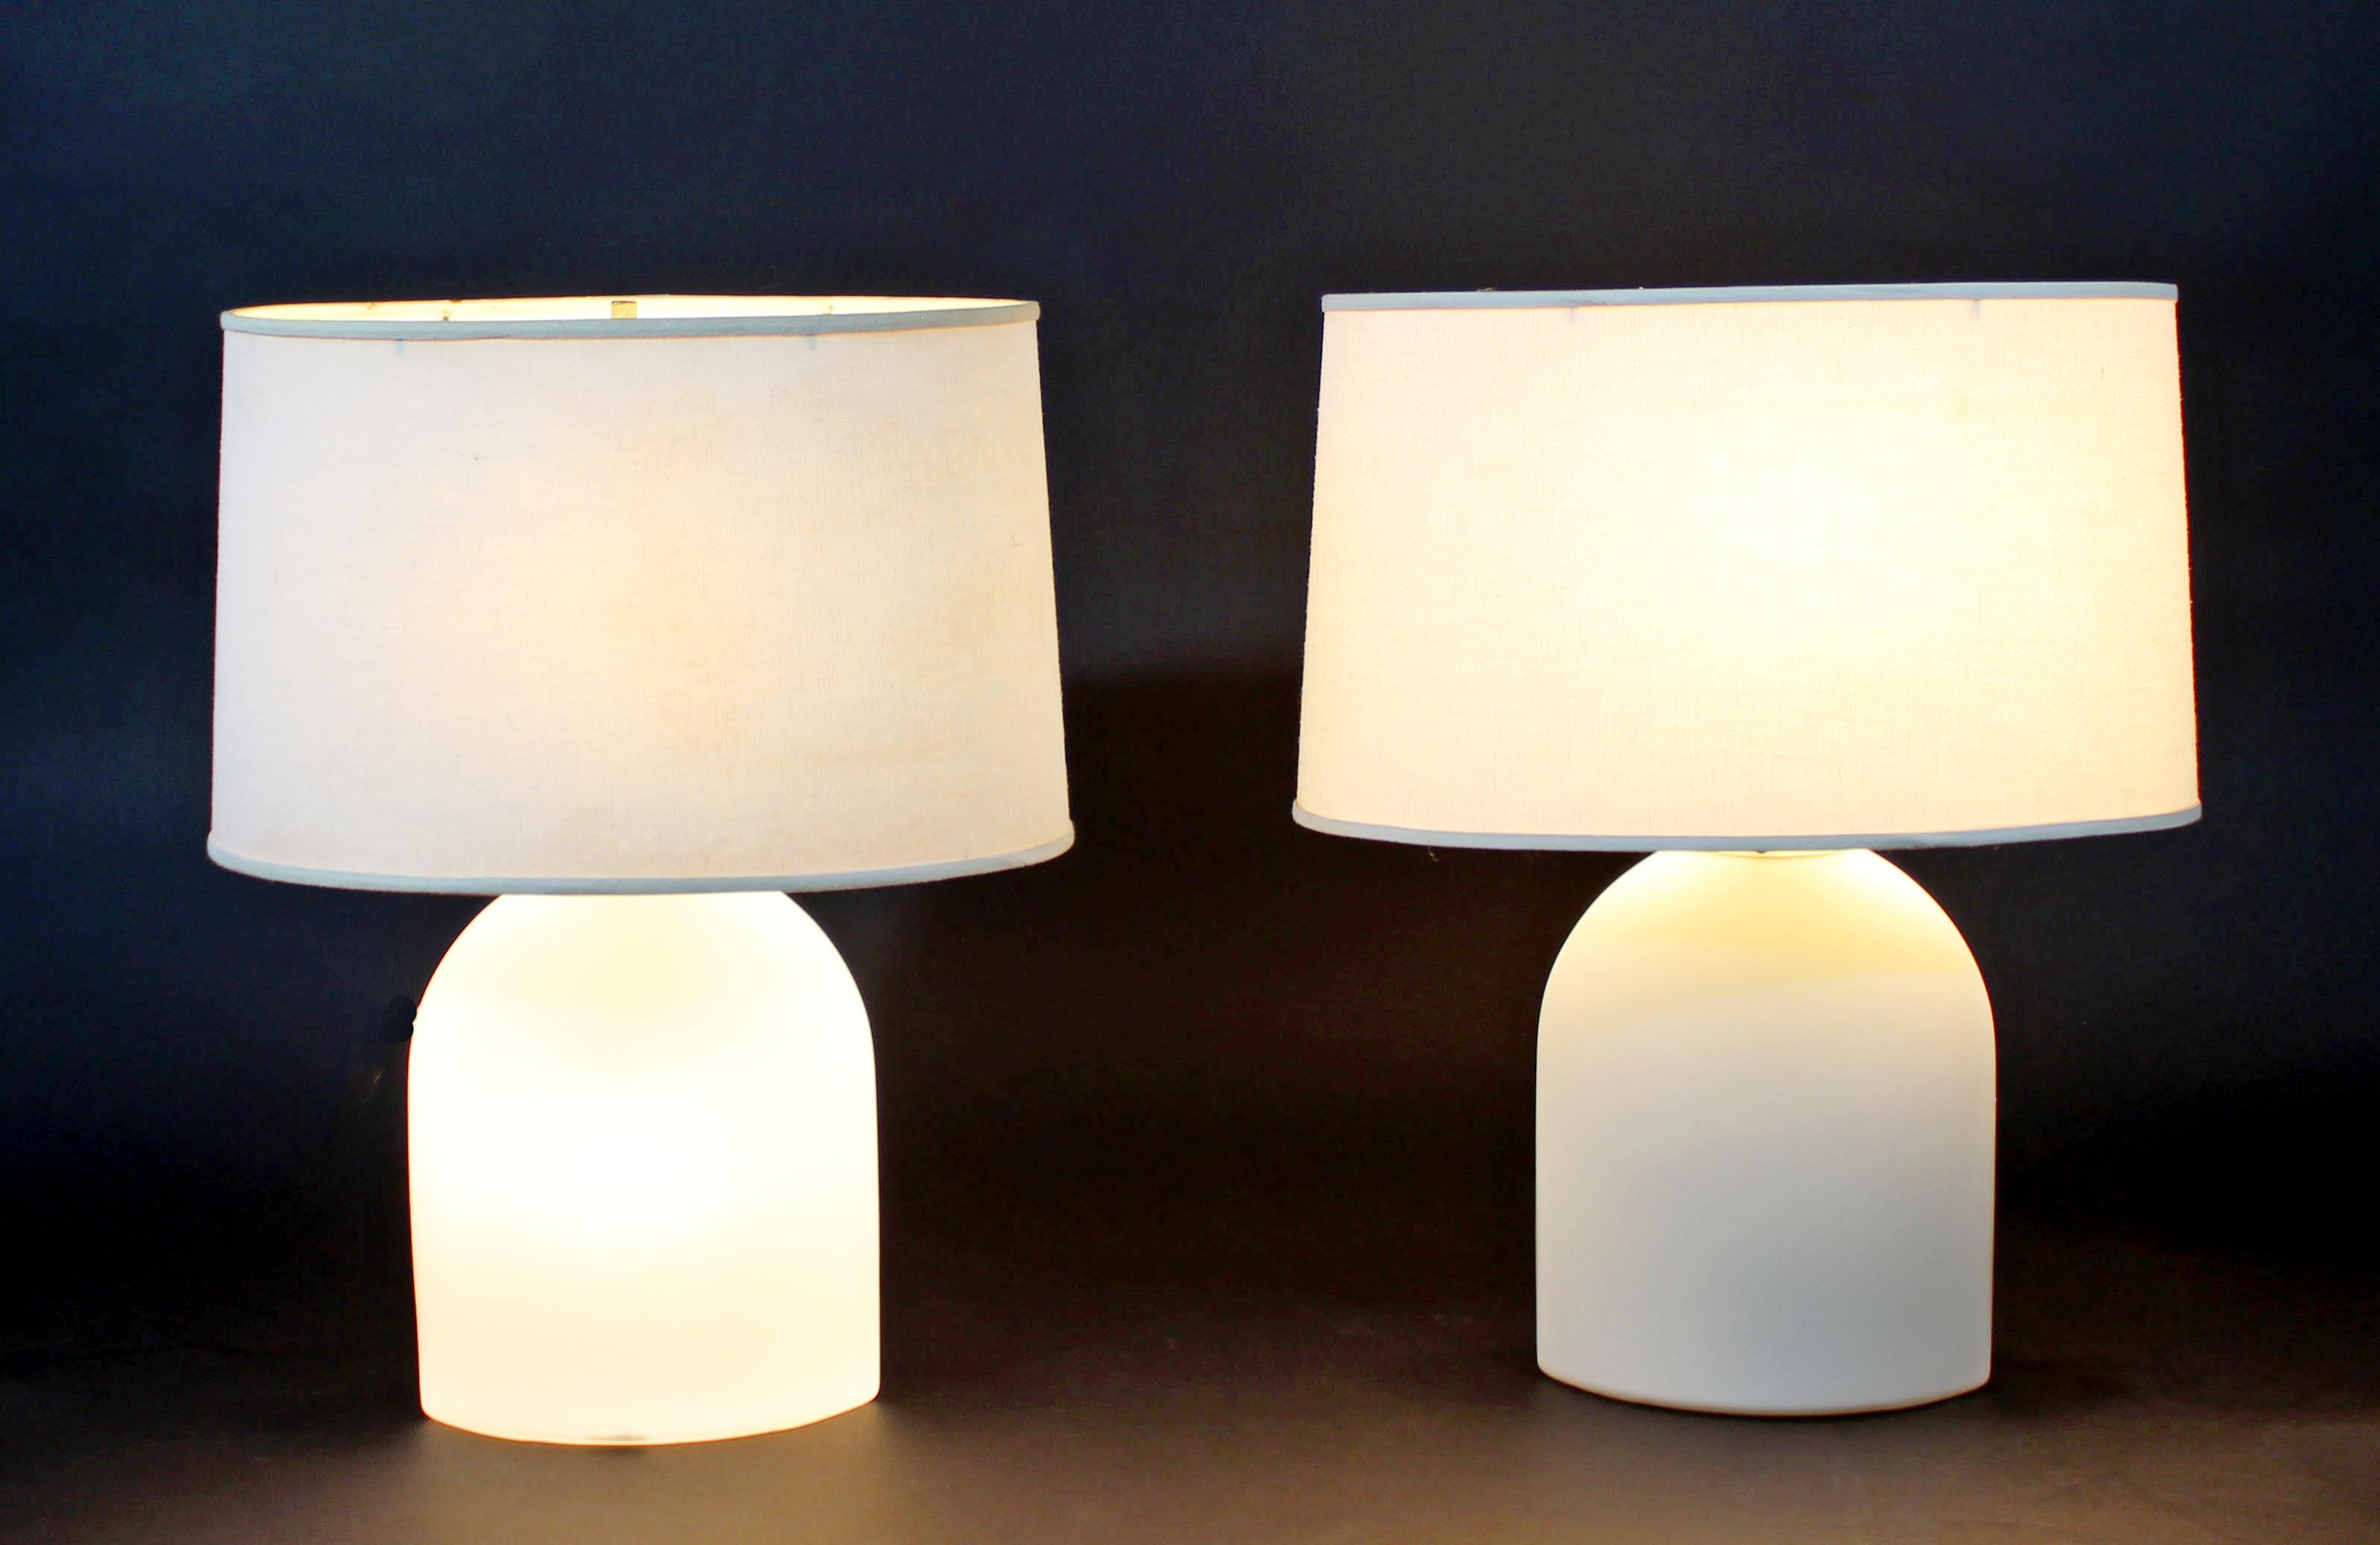 For your consideration is a stunning pair of white glass table lamps, with original shades and finials, by Peill and Putzler for Koch & Lowy, circa the 1970s. In excellent condition. The dimensions of the shades are 16